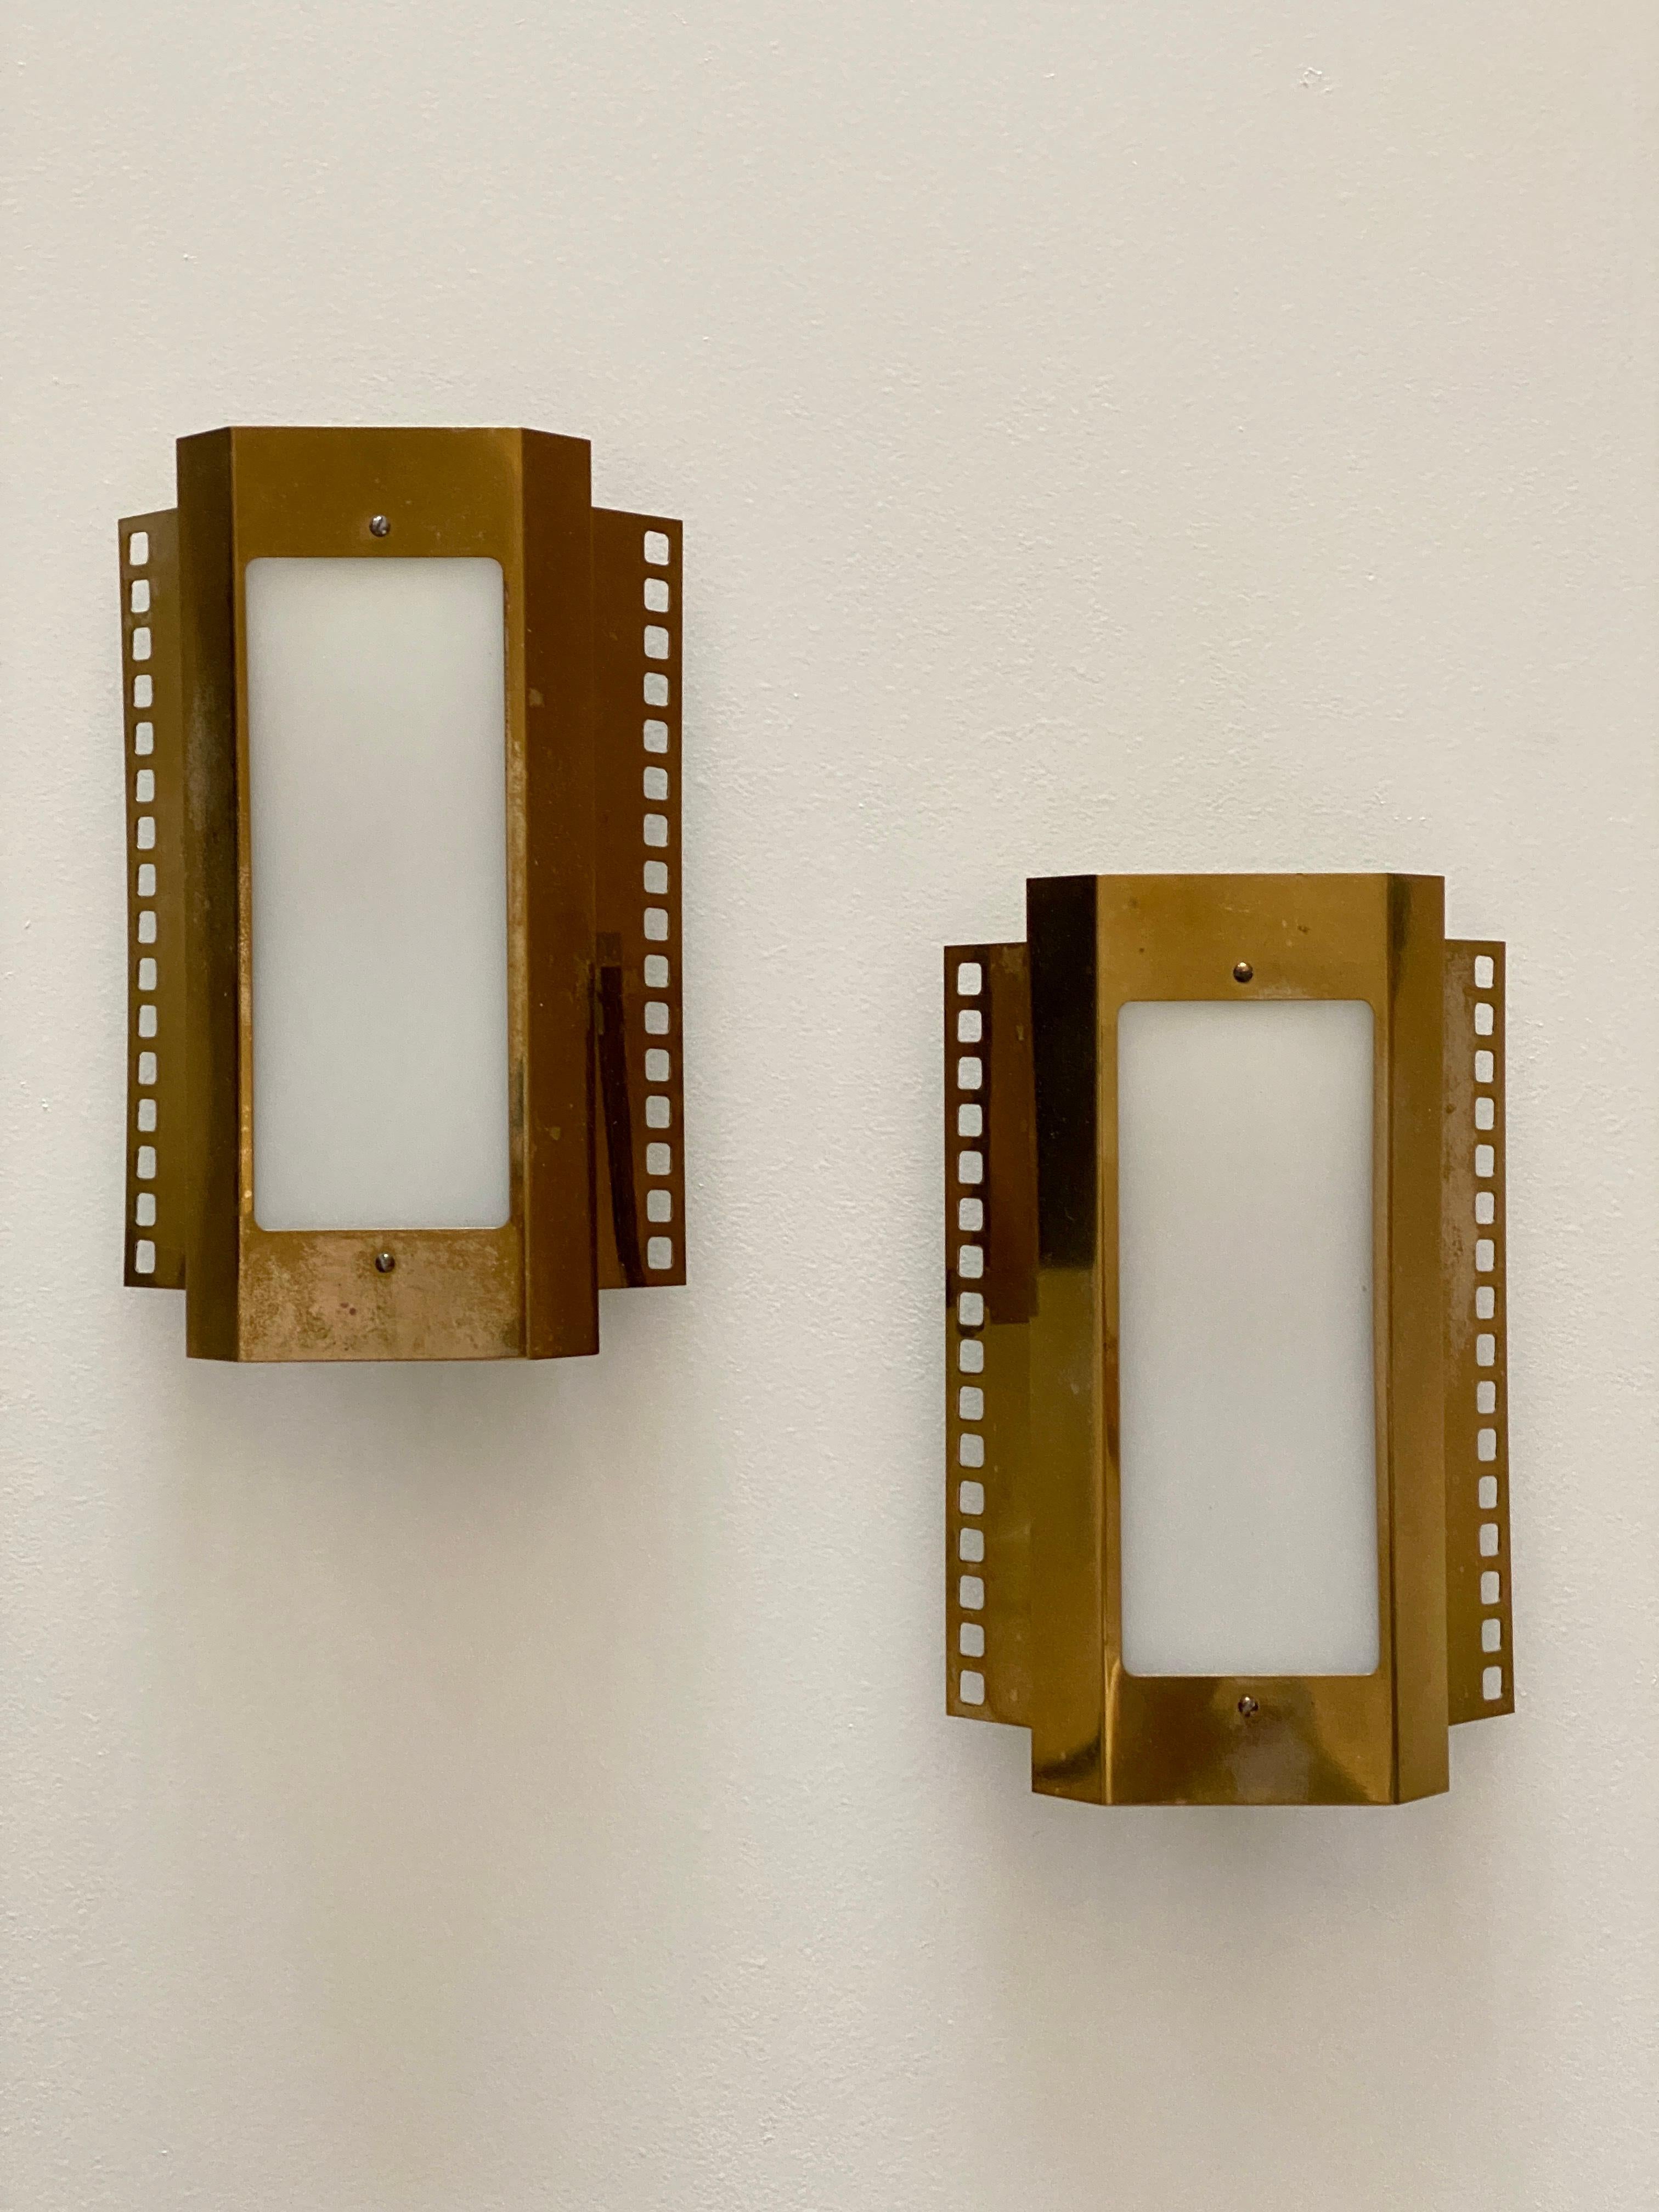 A pair of modernist wall lamps / lights / sconces. Designed and produced in Sweden, circa 1960s.

Features brass finished metal, and original glass. Features period markings indicating it's of Swedish production.

Other designers of the period